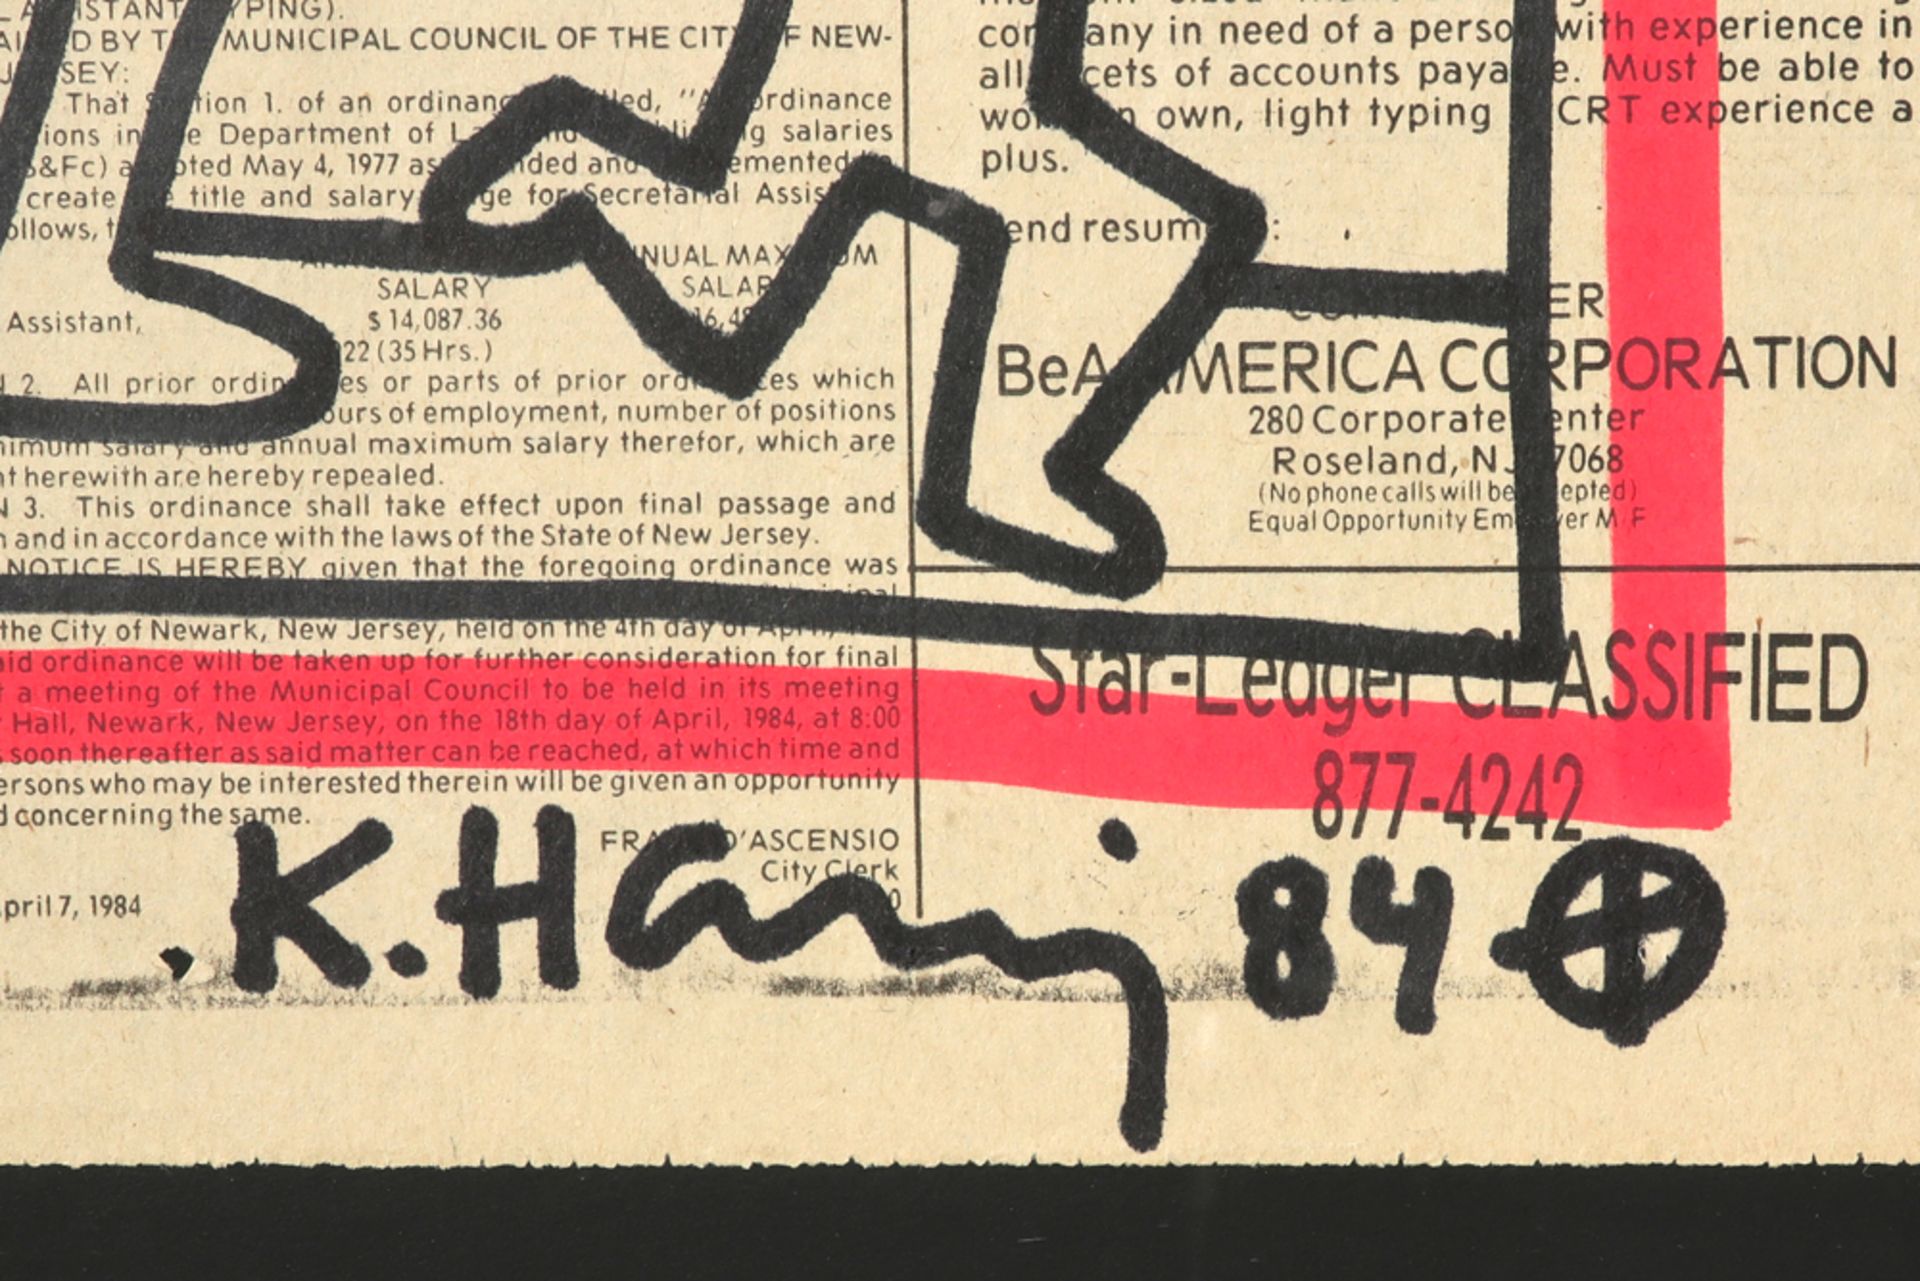 large Keith Haring signed and (19)84 dated drawing on a page of "The Star Ledger" from New Jersey dd - Image 2 of 3